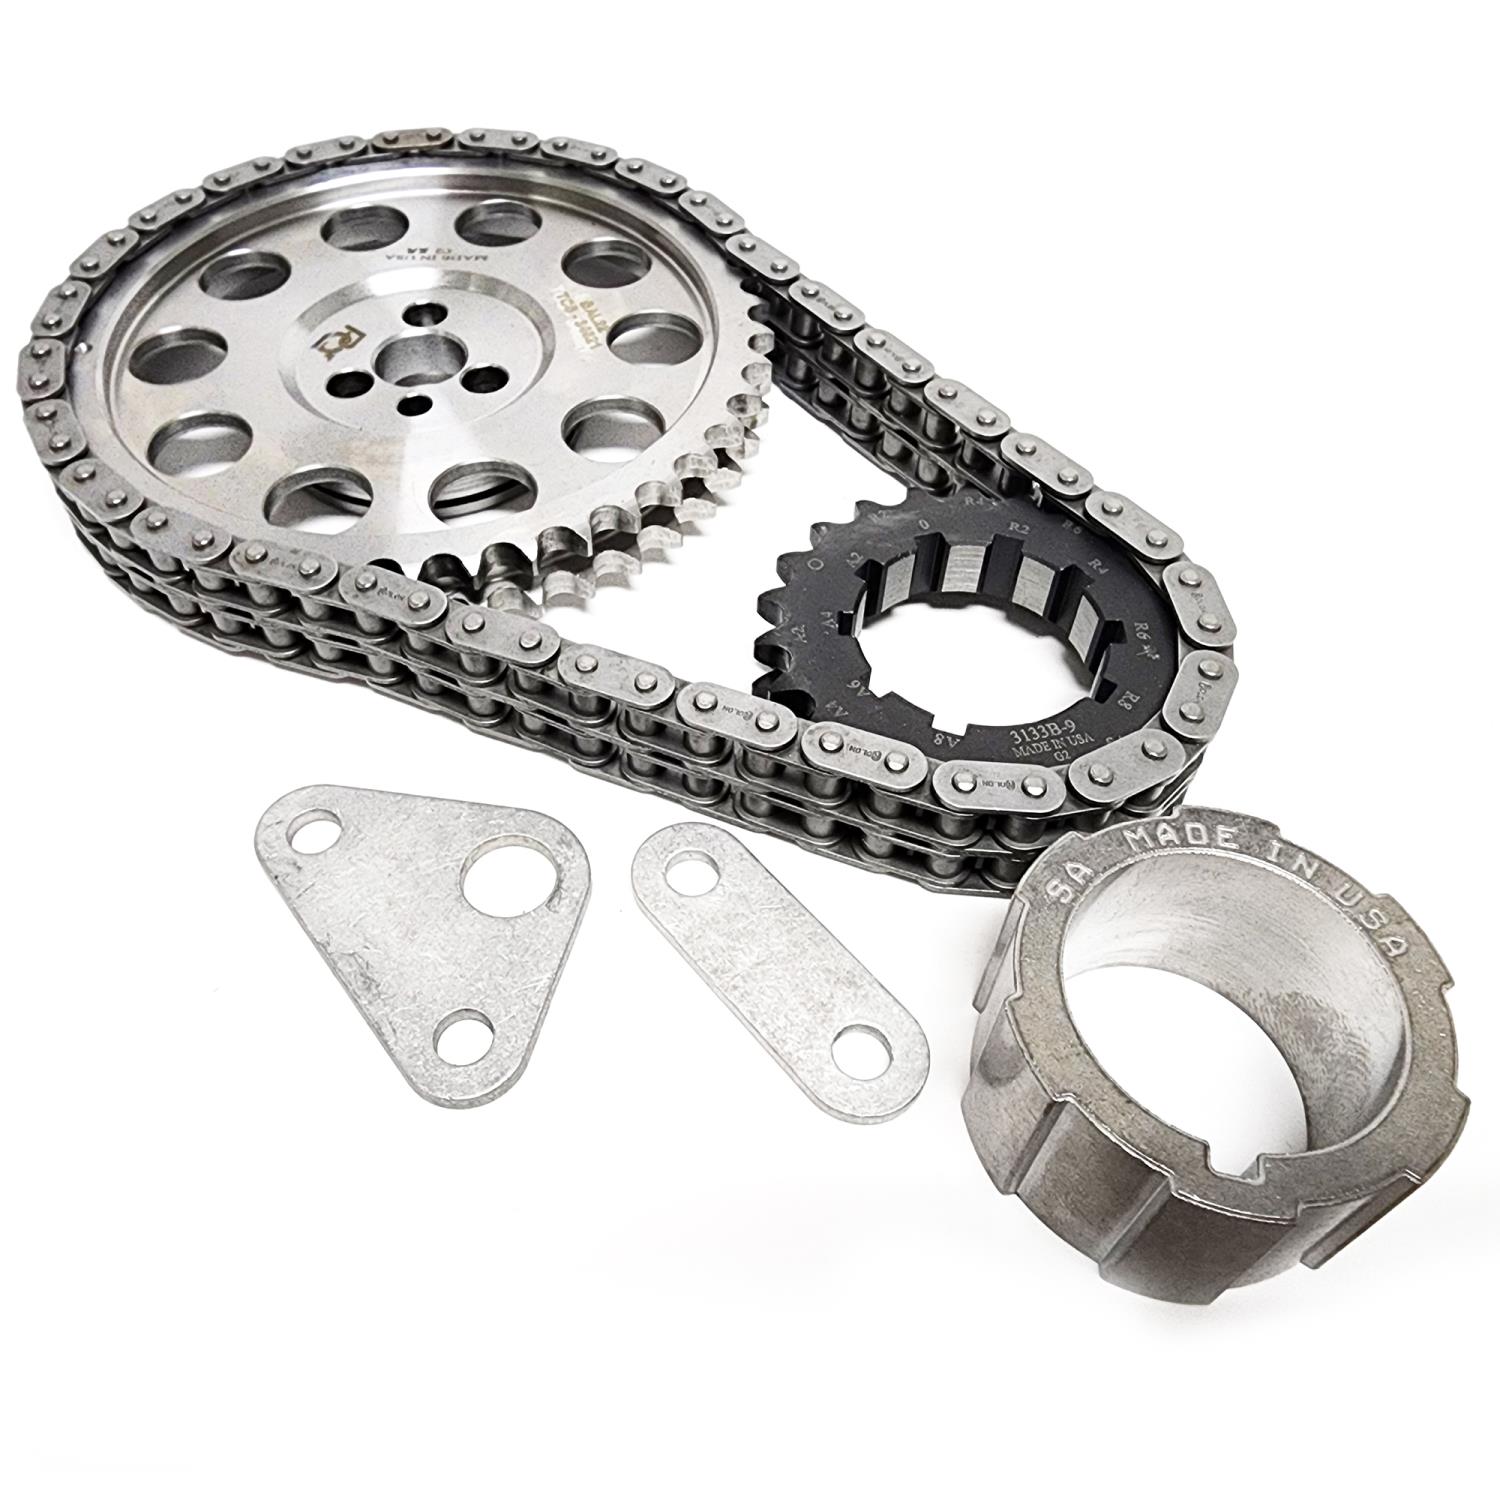 Double-Roller Timing Chain and Gear Set for 1997-2004 GM LS1/LS6/LM7/L59